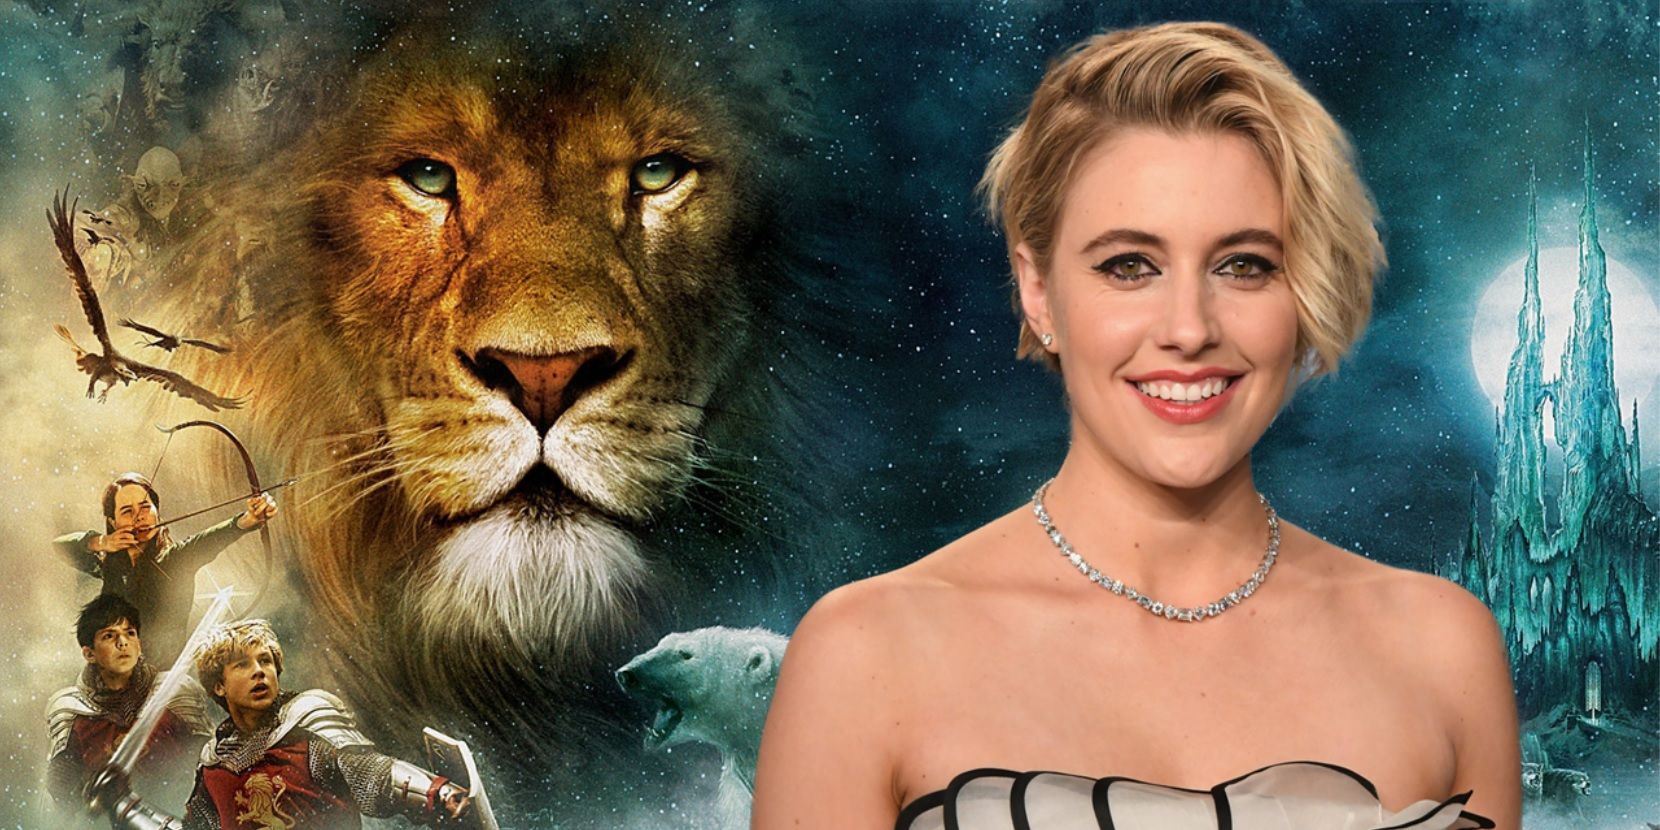 Greta Gerwig imposed over an image of the Chronicles of Narnia The Lion the Witch and the Wardrobe poster